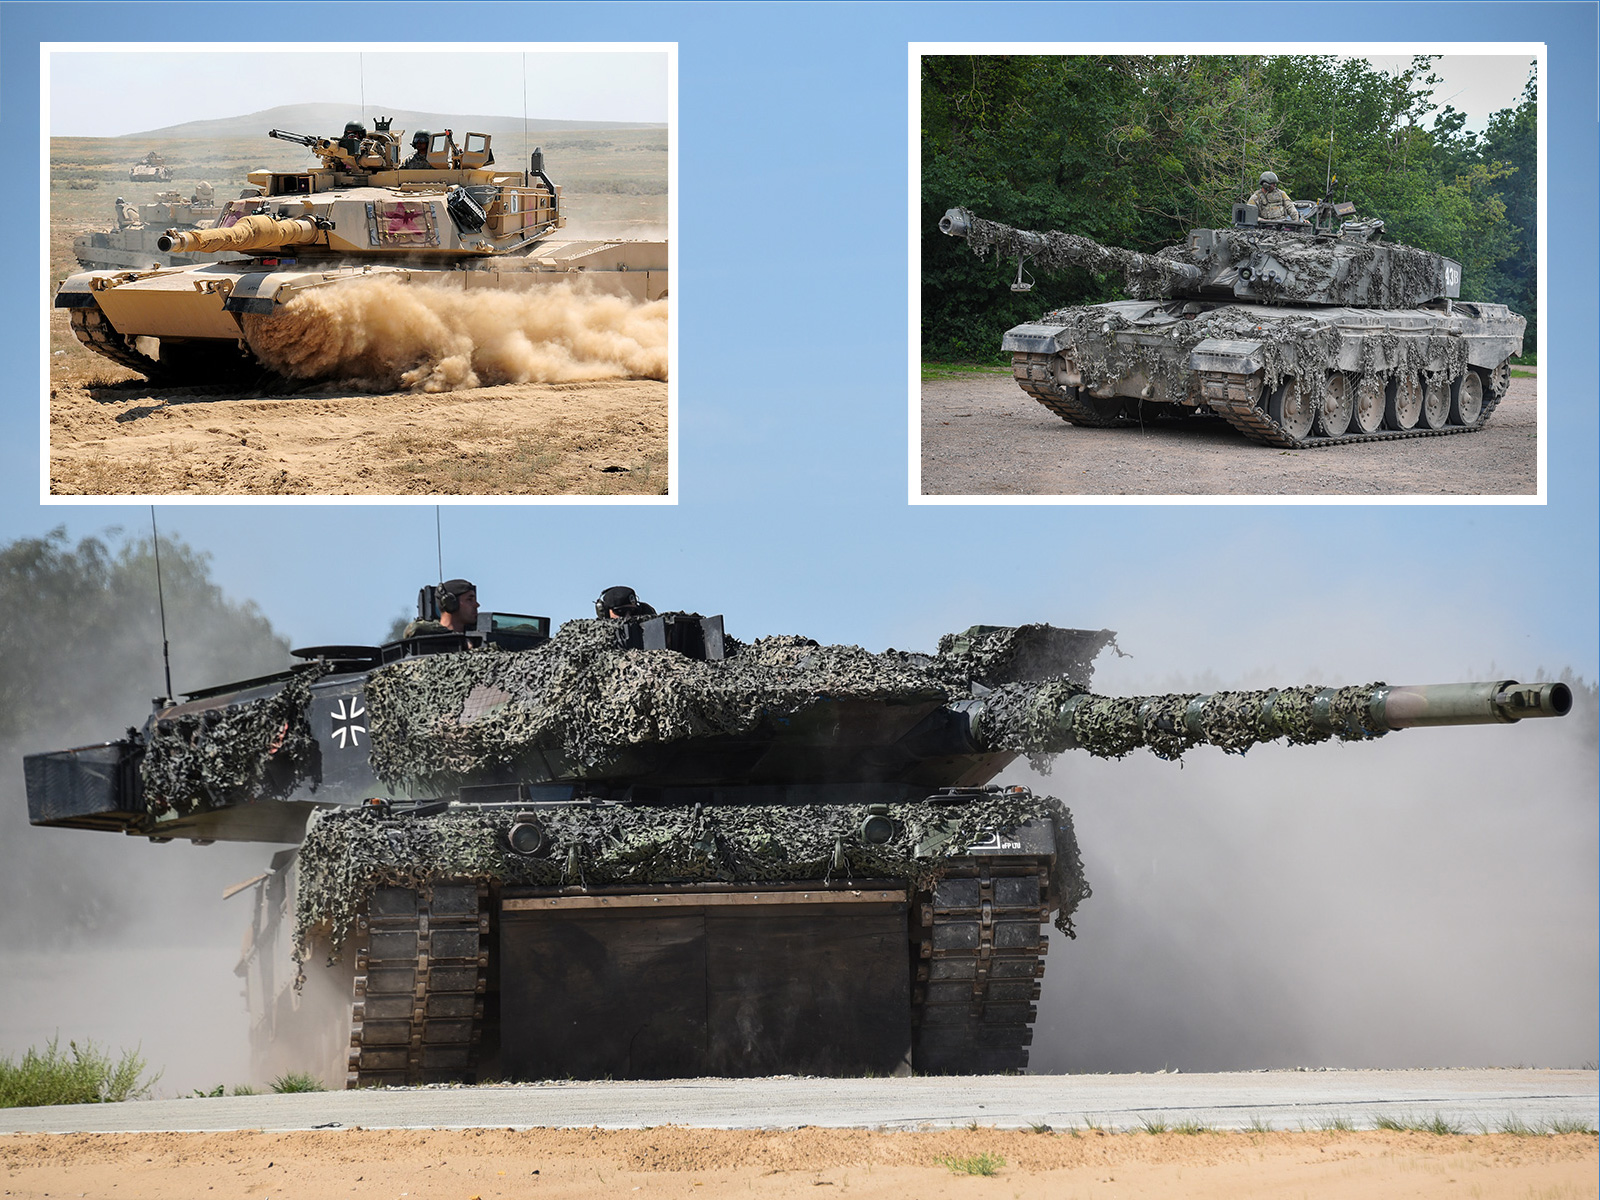 From Challenger to Leopard: How Ukraine's tanks compare to Russia's